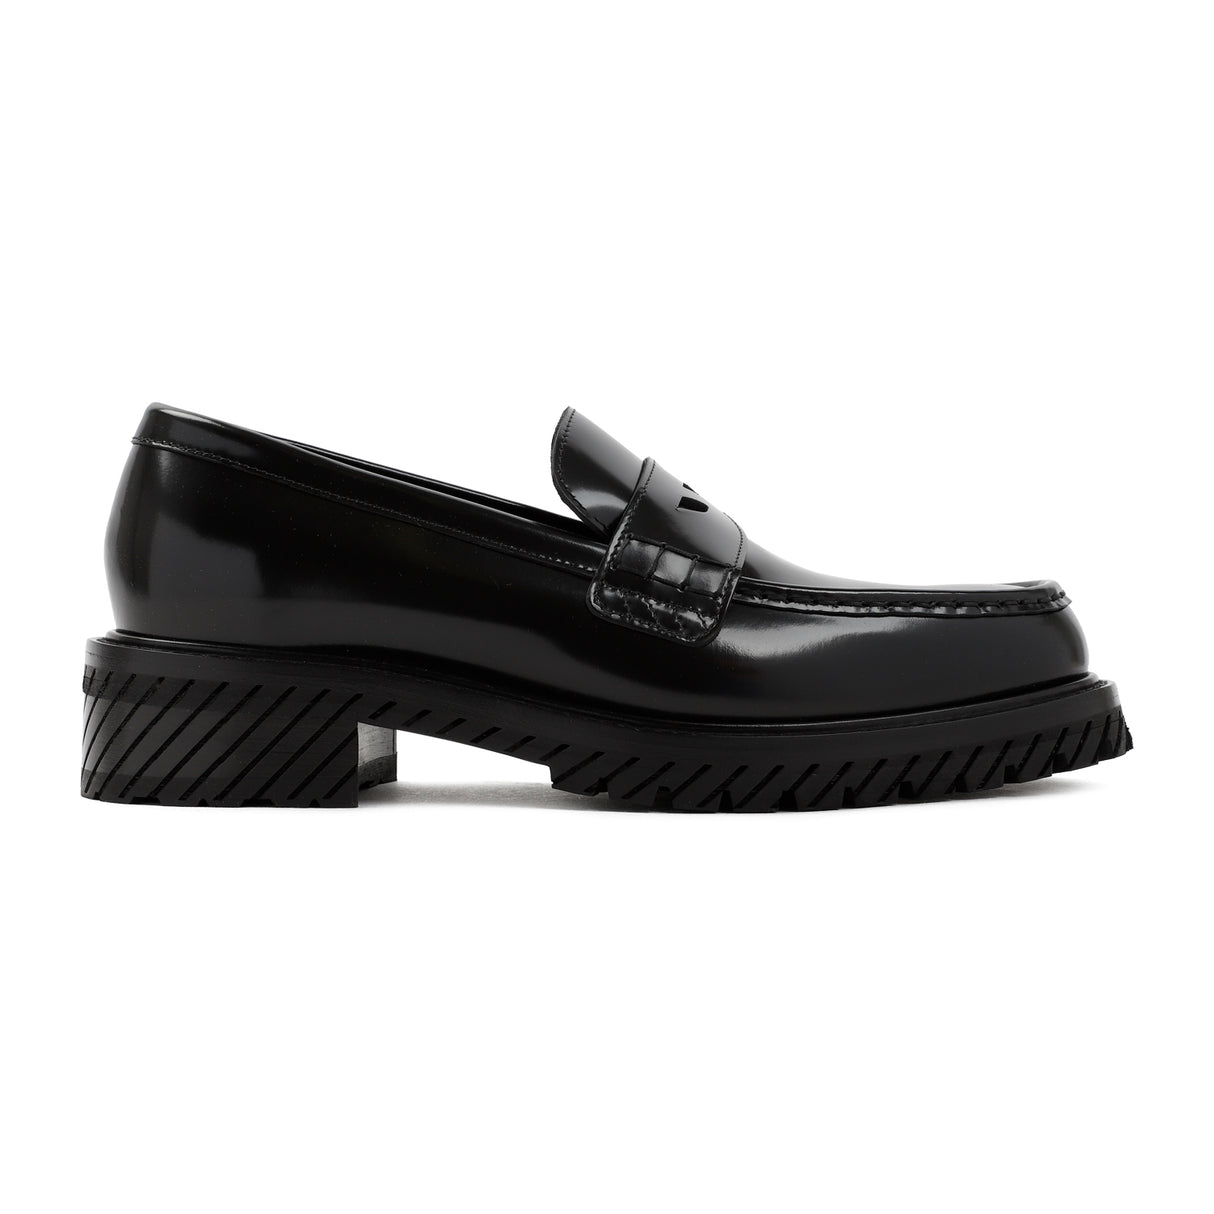 OFF-WHITE Stitch Detailed Leather Loafers for Men in Black